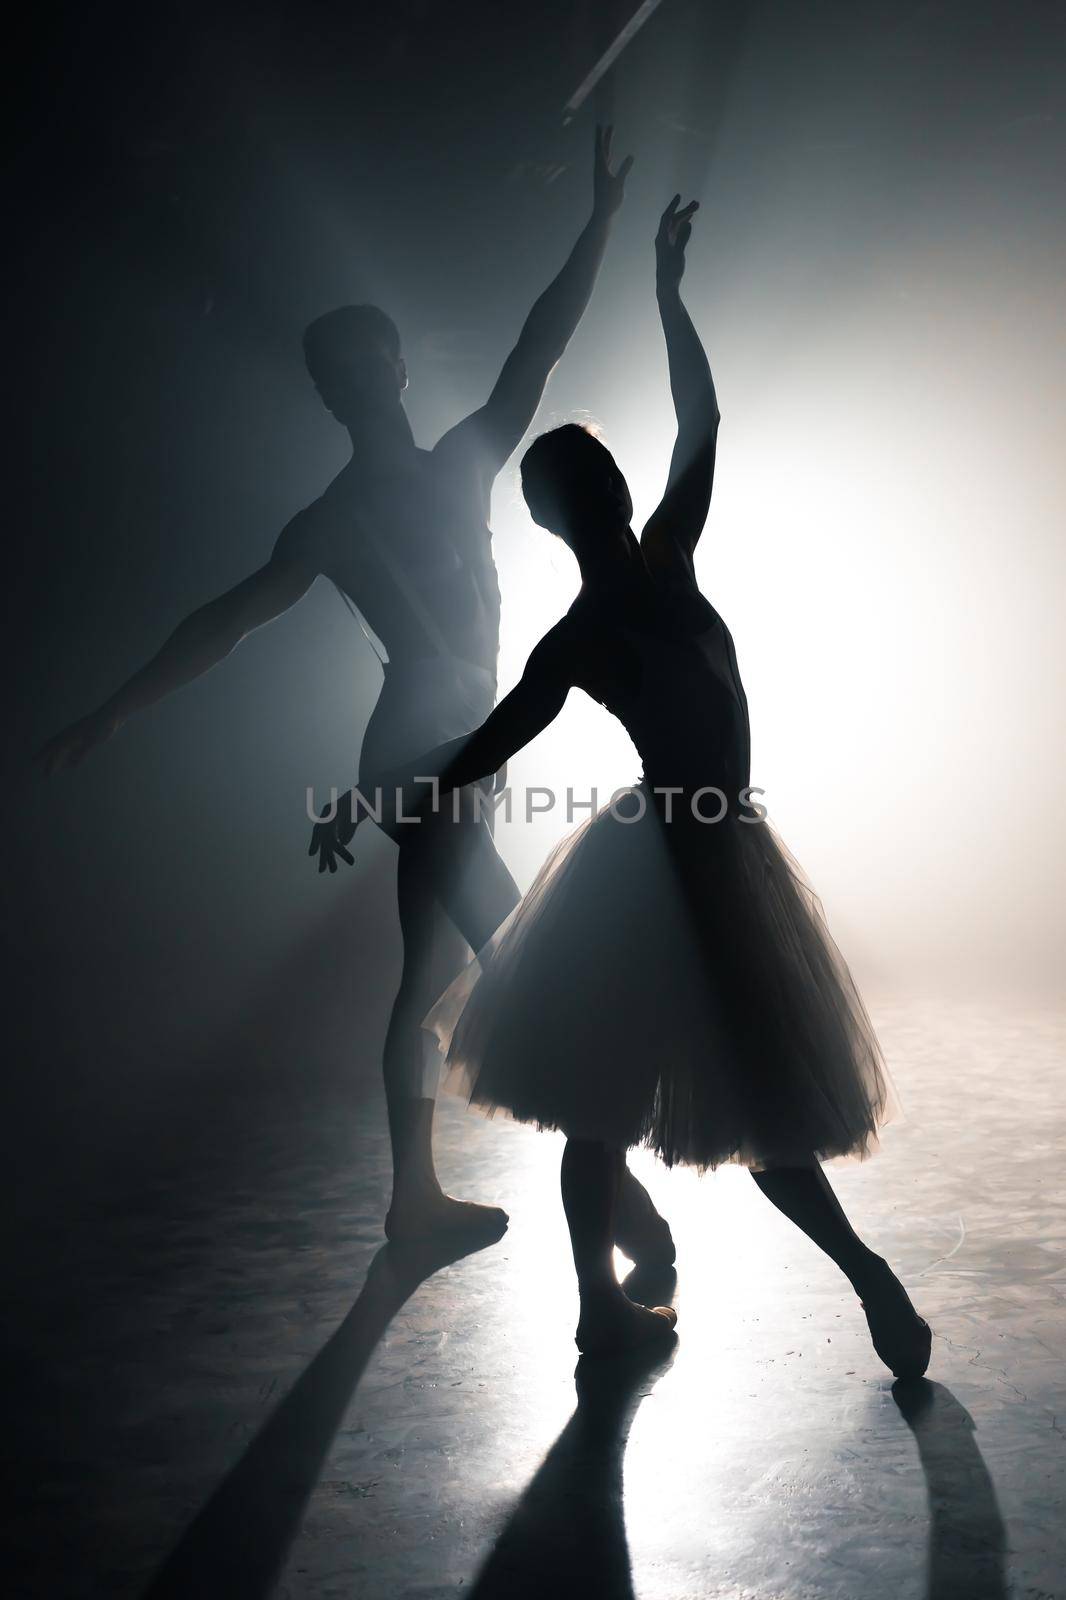 Graceful ballerina and her male partner dancing elements of classical or modern ballet in dark with floodlight backlight. Couple in smoke on black background. Art concept